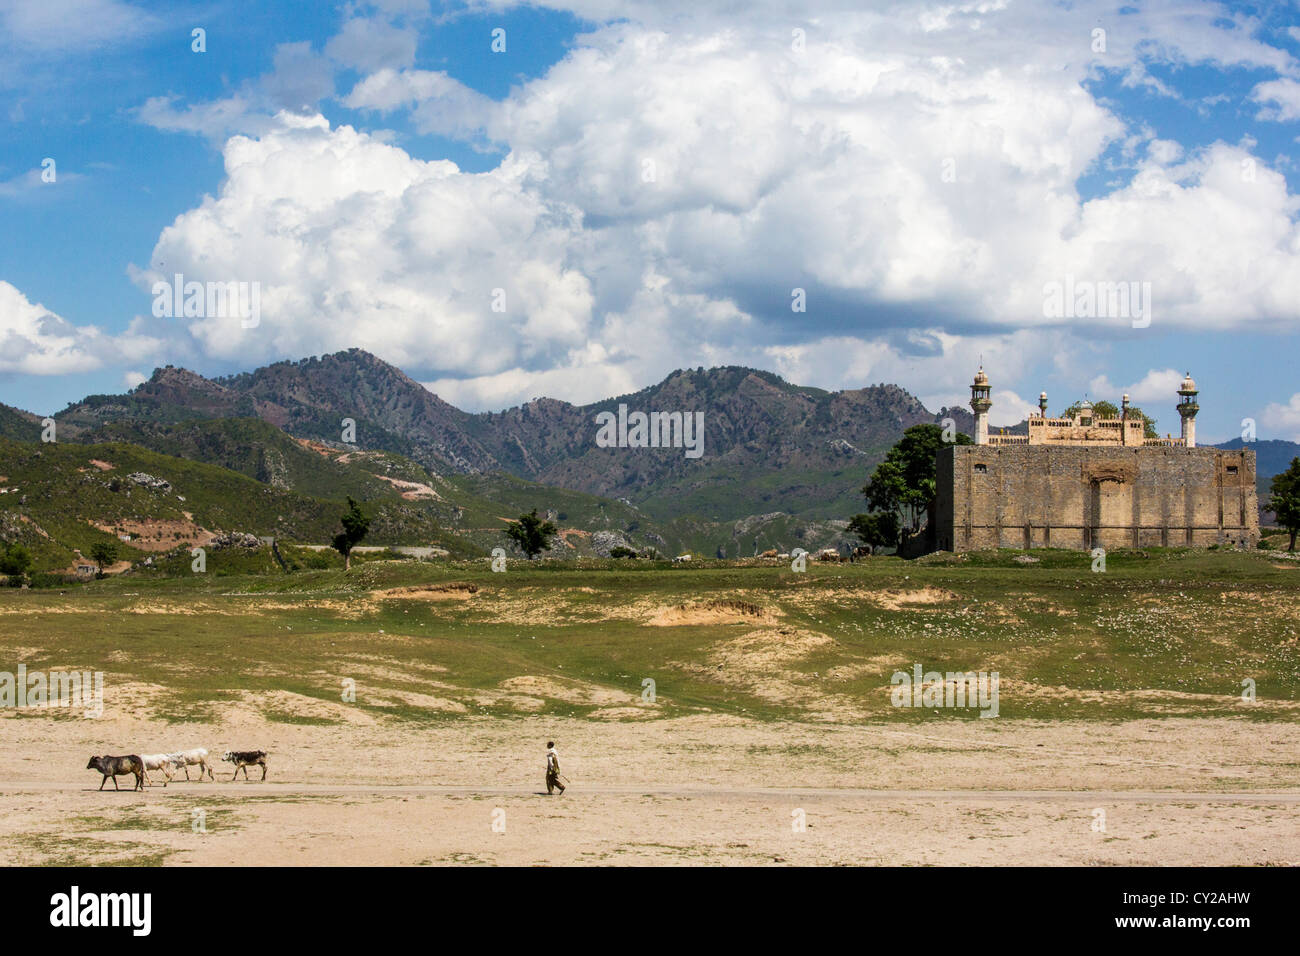 Mosque and cattle near Taxila, Pakistan Stock Photo